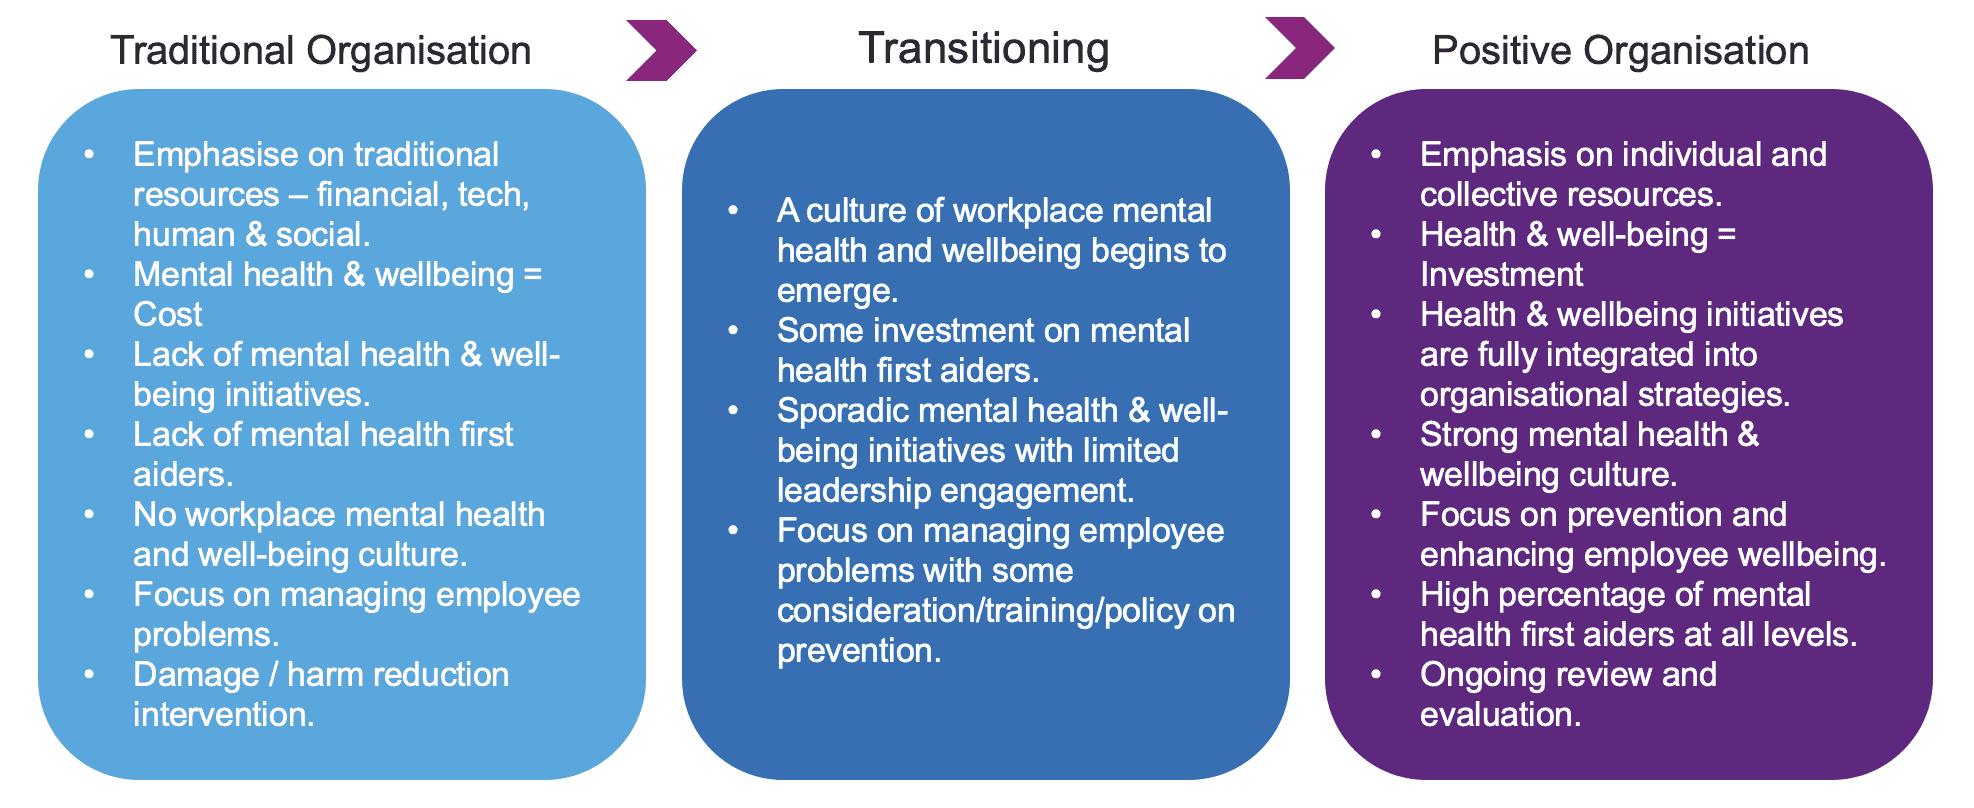 An image showing the transition from a traditional to a positive organisation.